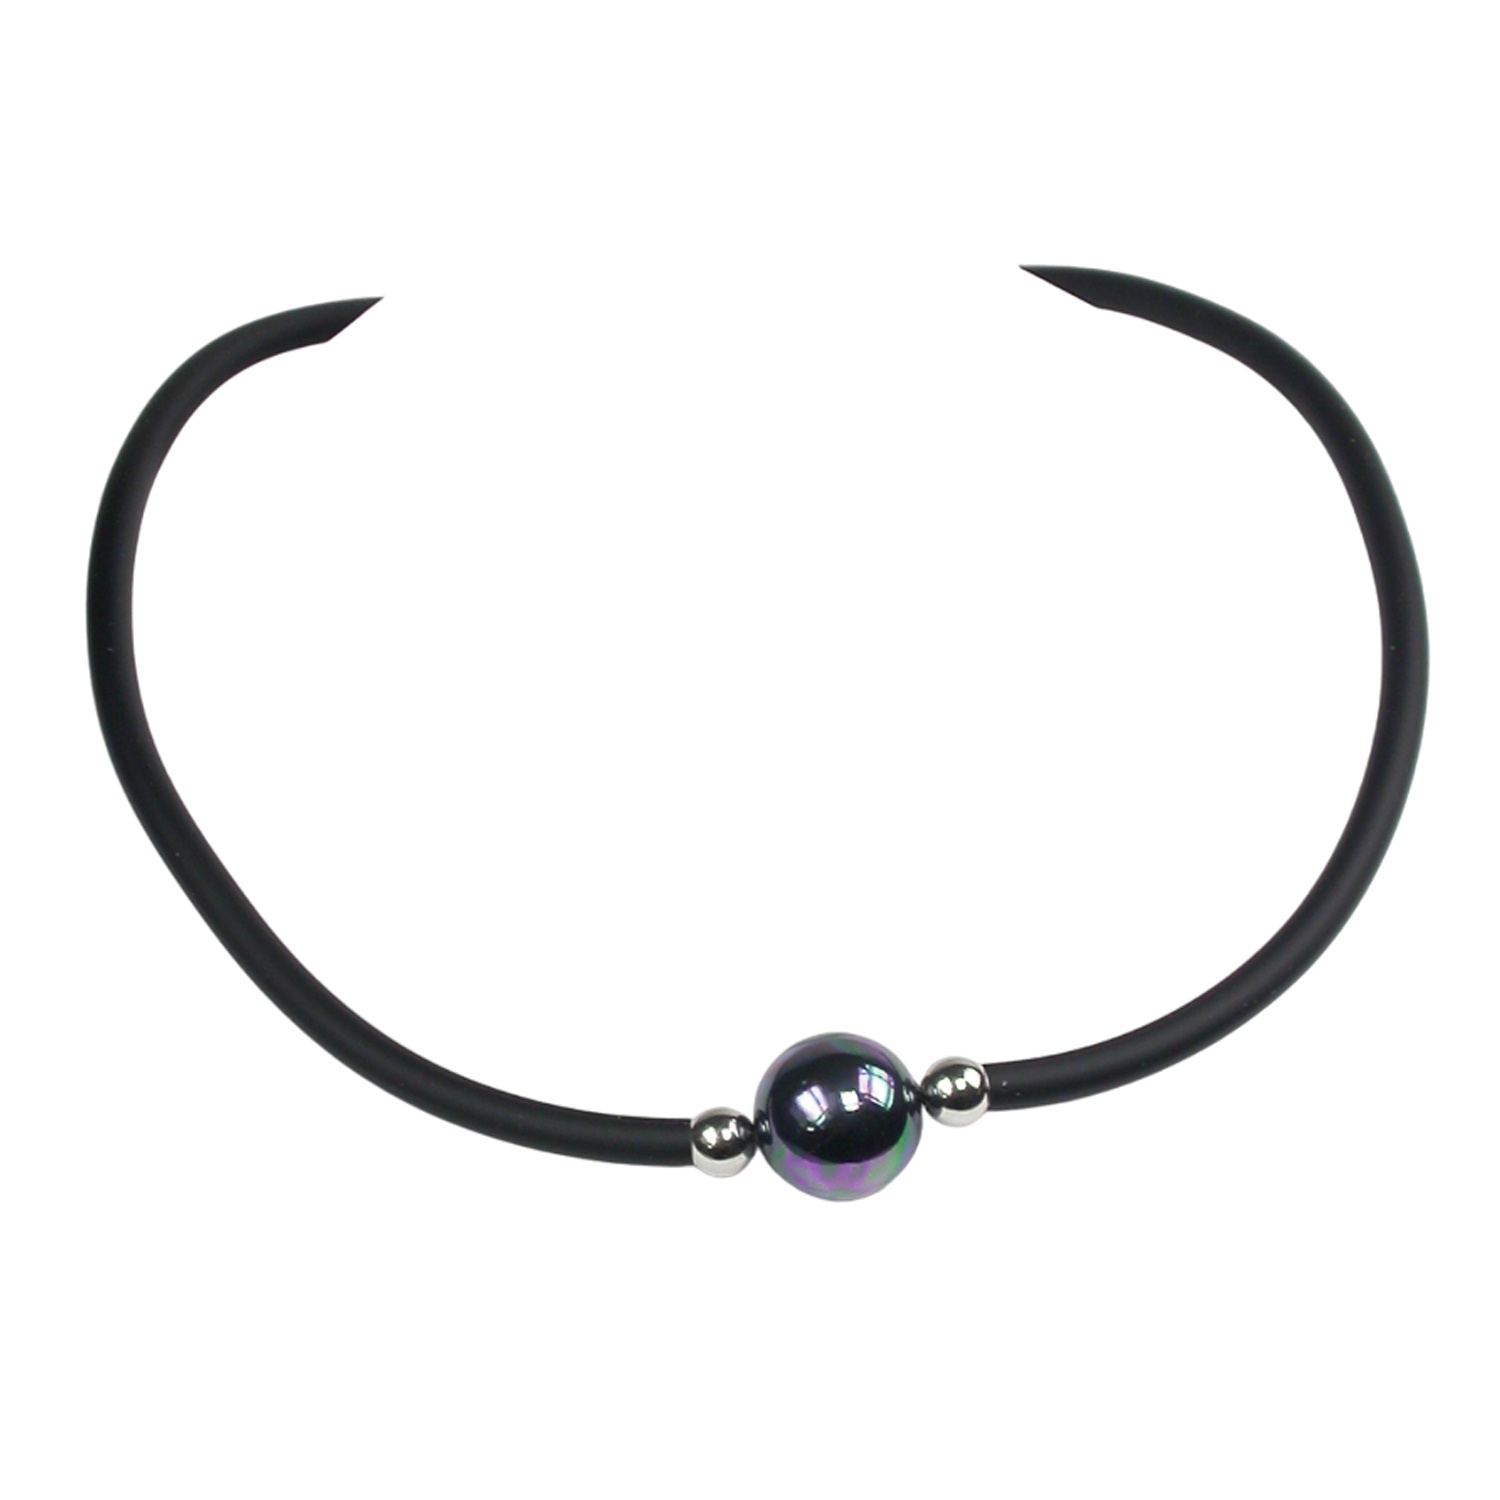 Rubber Necklace with a 14 mm black Pearl